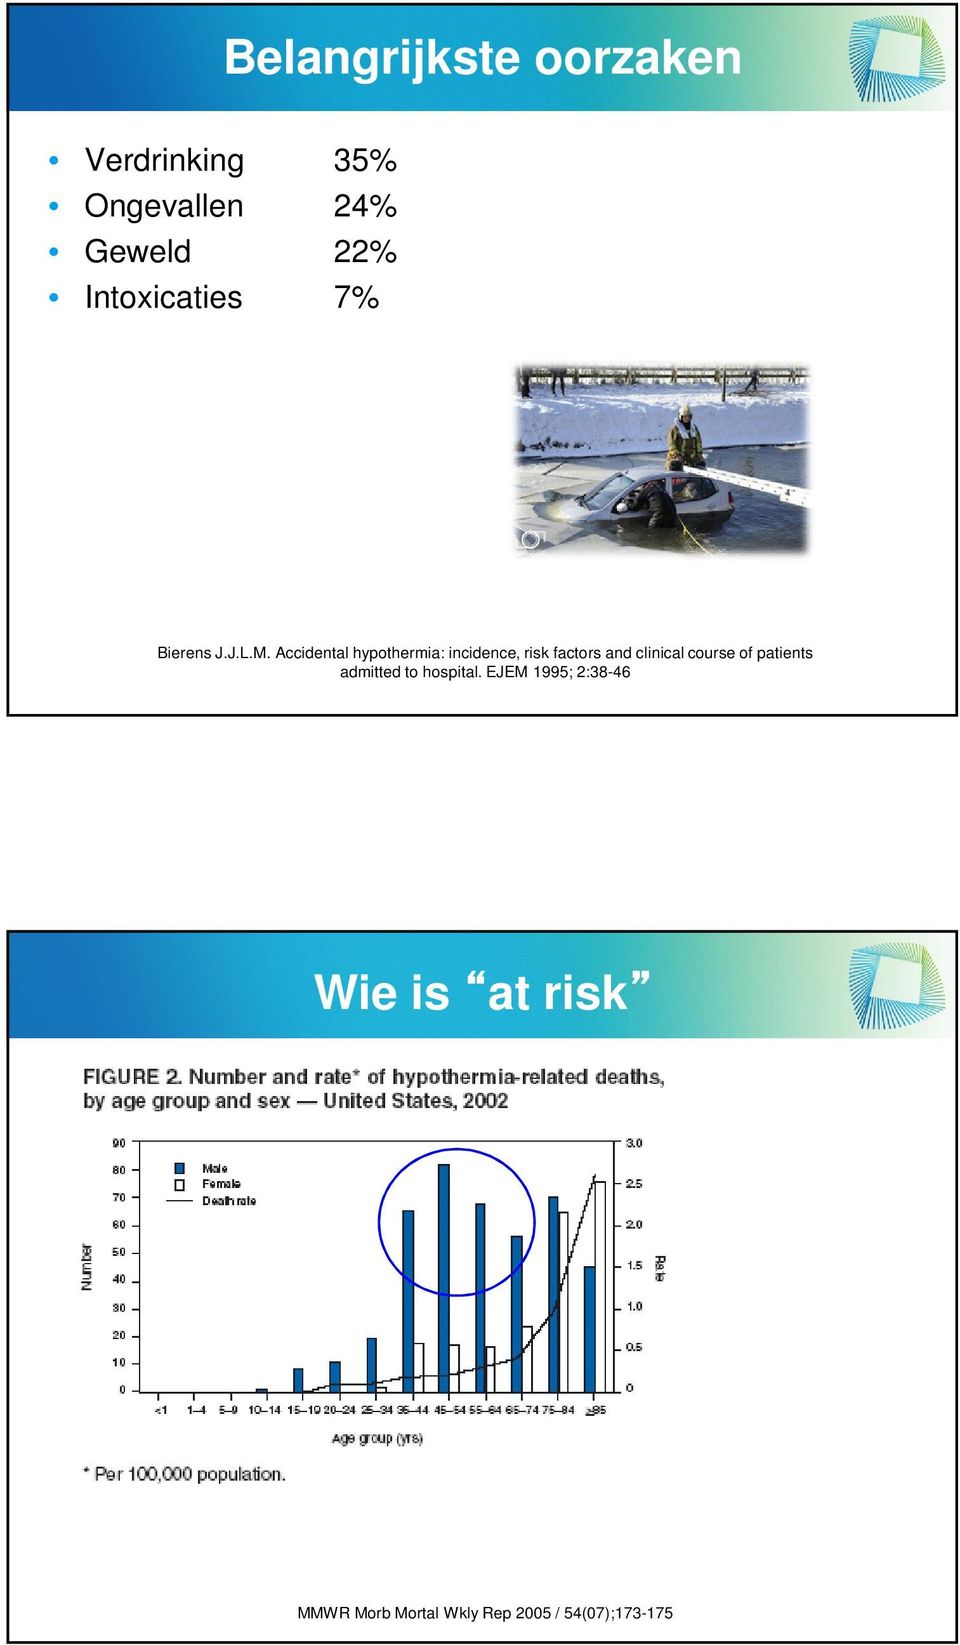 Accidental hypothermia: incidence, risk factors and clinical course of